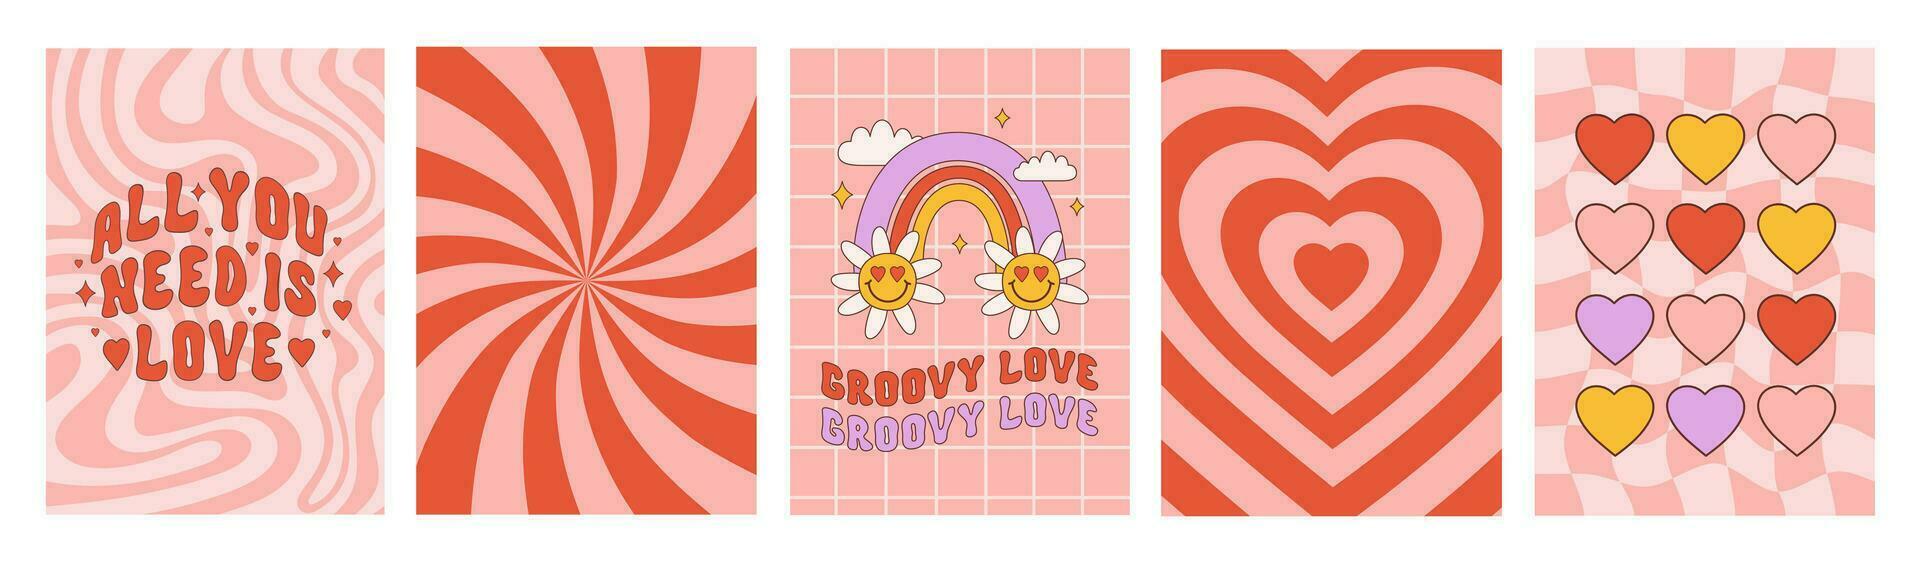 Romantic retro groovy set backgrounds in style 60s, 70s. Trendy vector illustration. Red and pink colors